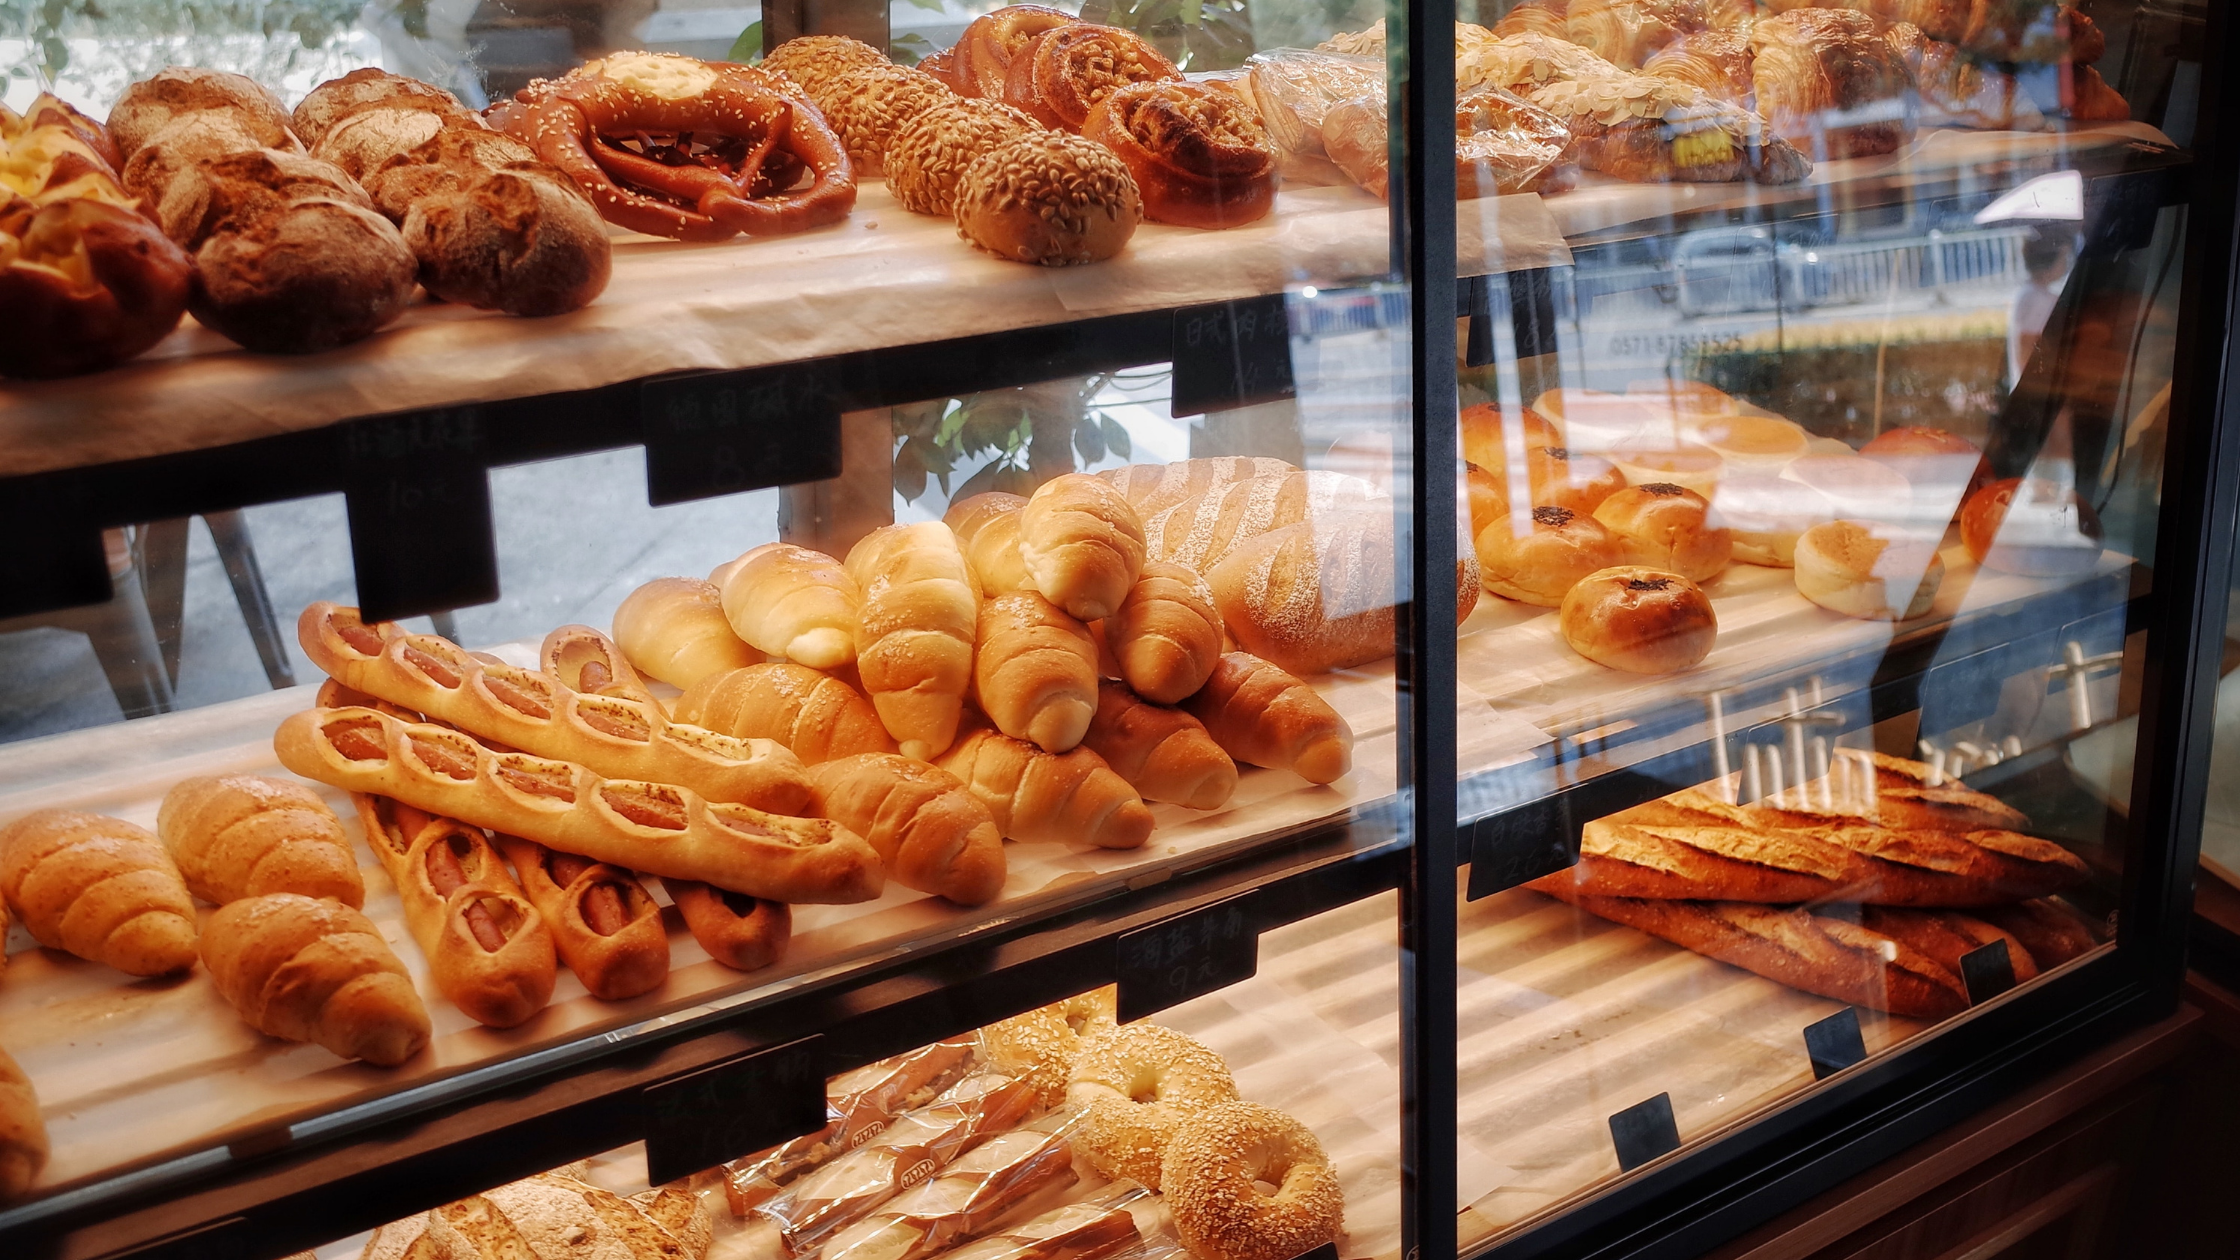 An assortment of pastries in a glass case